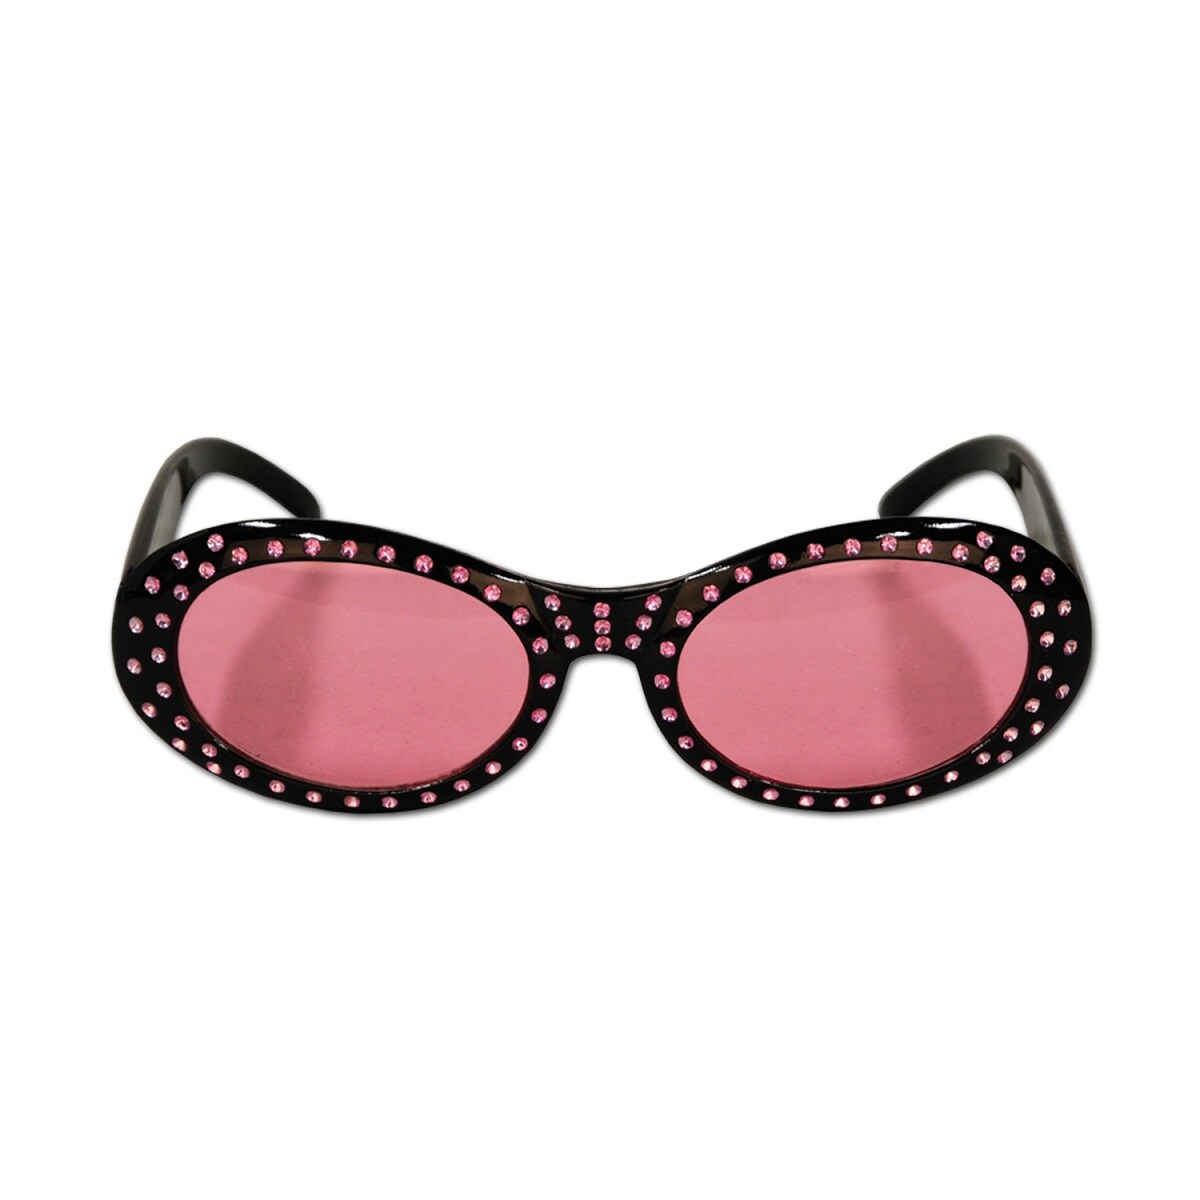 Party Central Pack of 6 Pink and Black Jeweled Diva Party Eyeglasses Costume Accessories - One Size